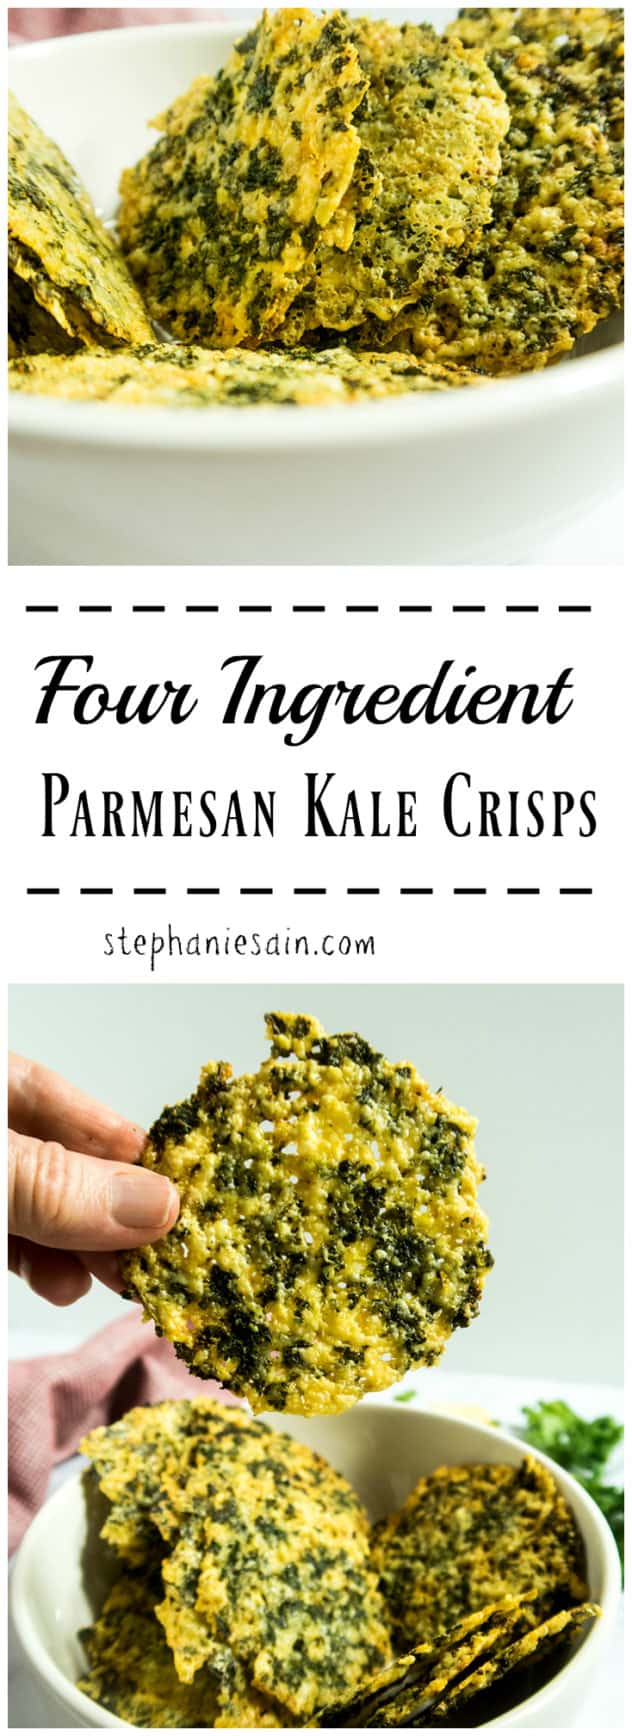 Four Ingredient Parmesan Kale Crisps are a tasty, low carb snack or appetizer. Also great served on salads or with soup. Gluten Free & Vegetarian.